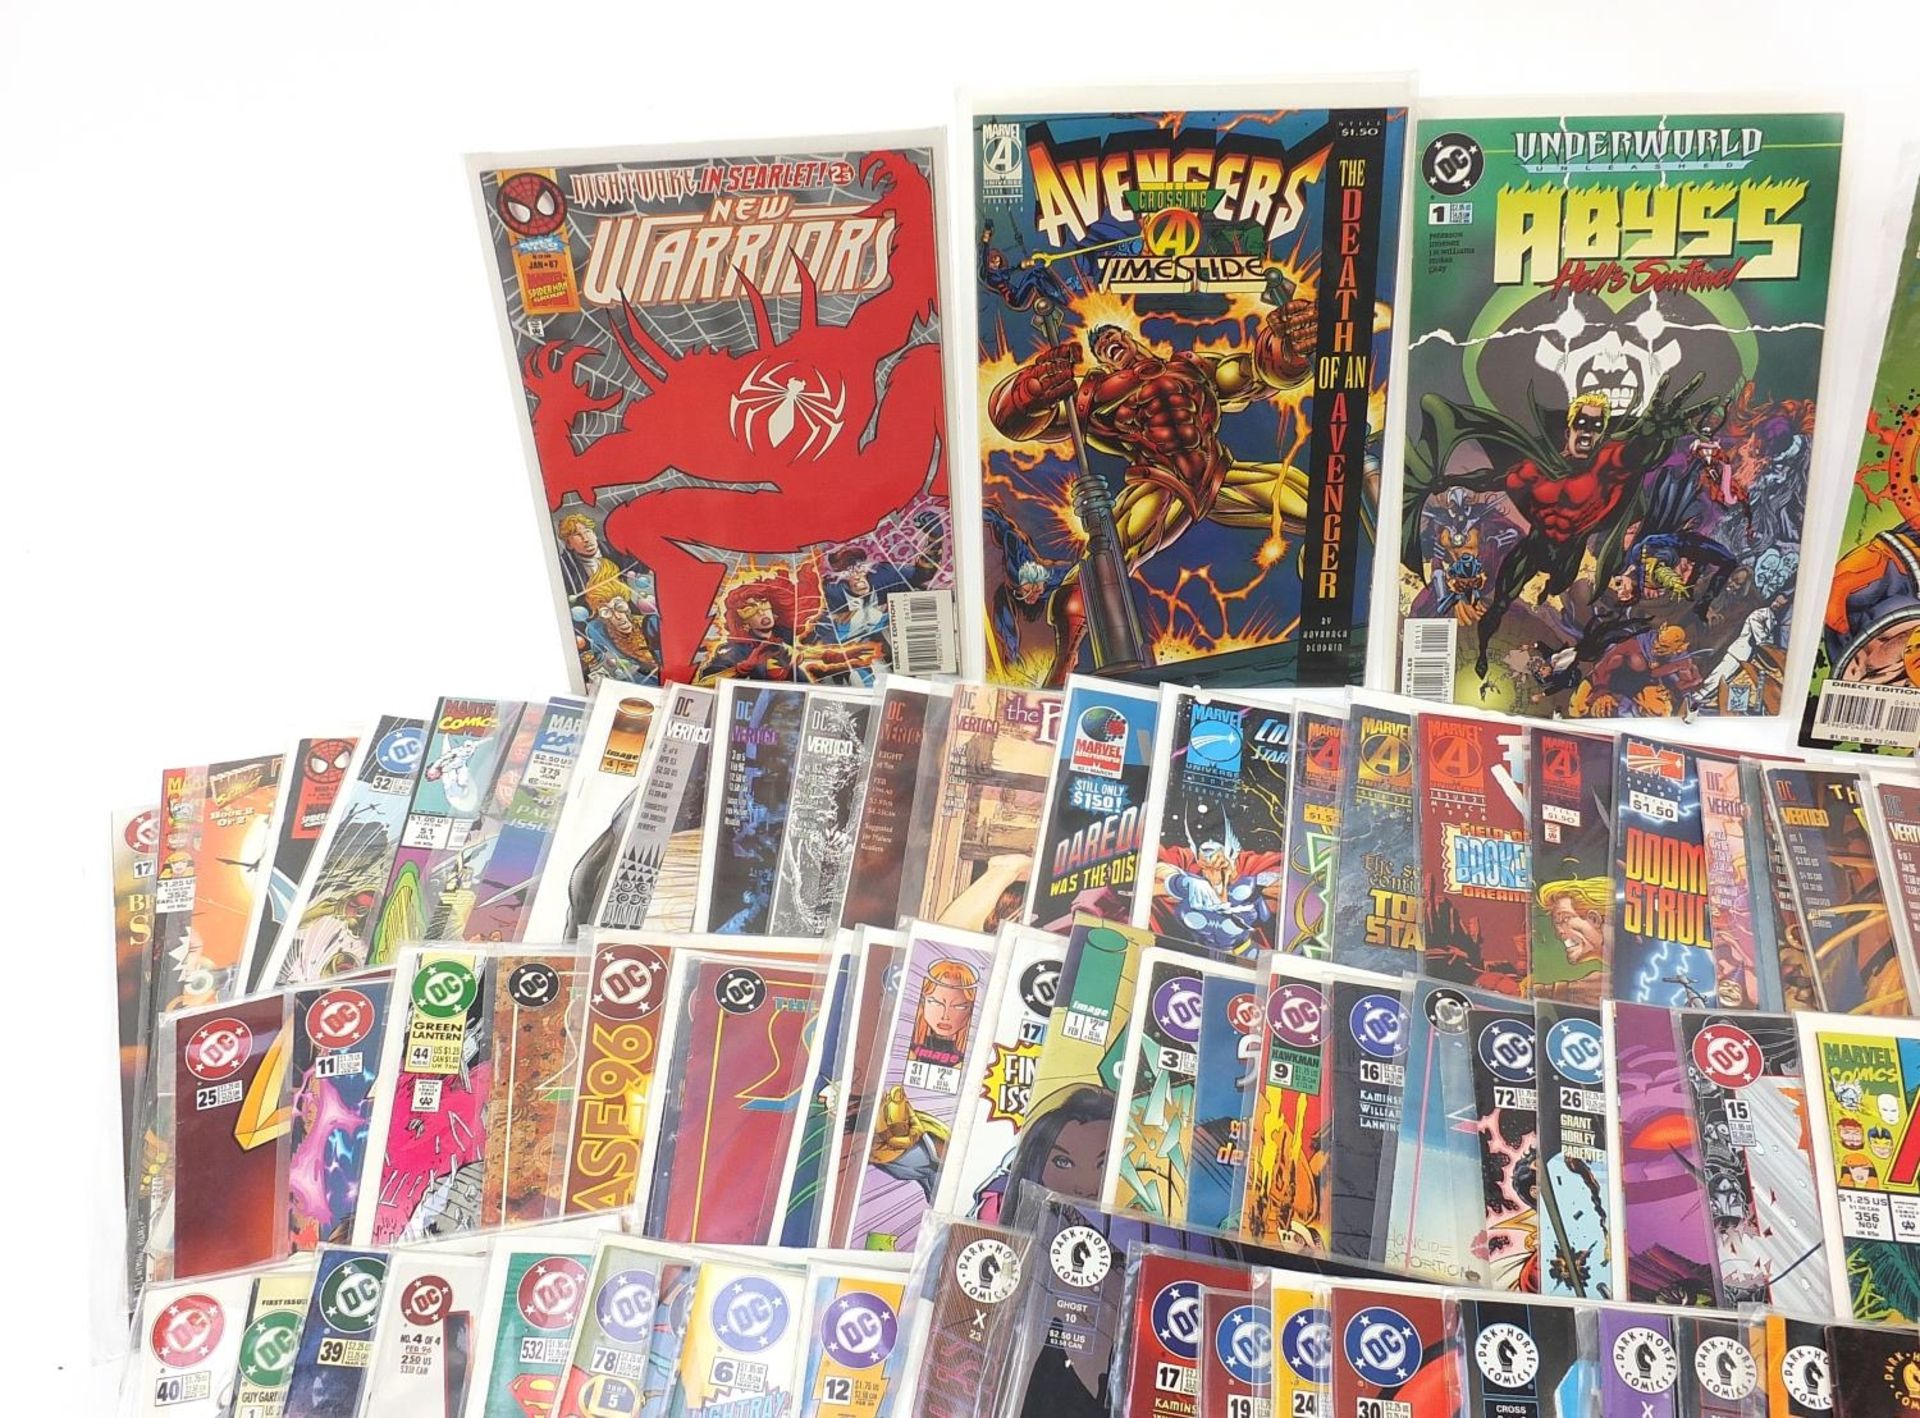 Collection of vintage and later comics including Marvel, Avengers, Storm Watch, Gen 13 and DC :For - Image 2 of 5